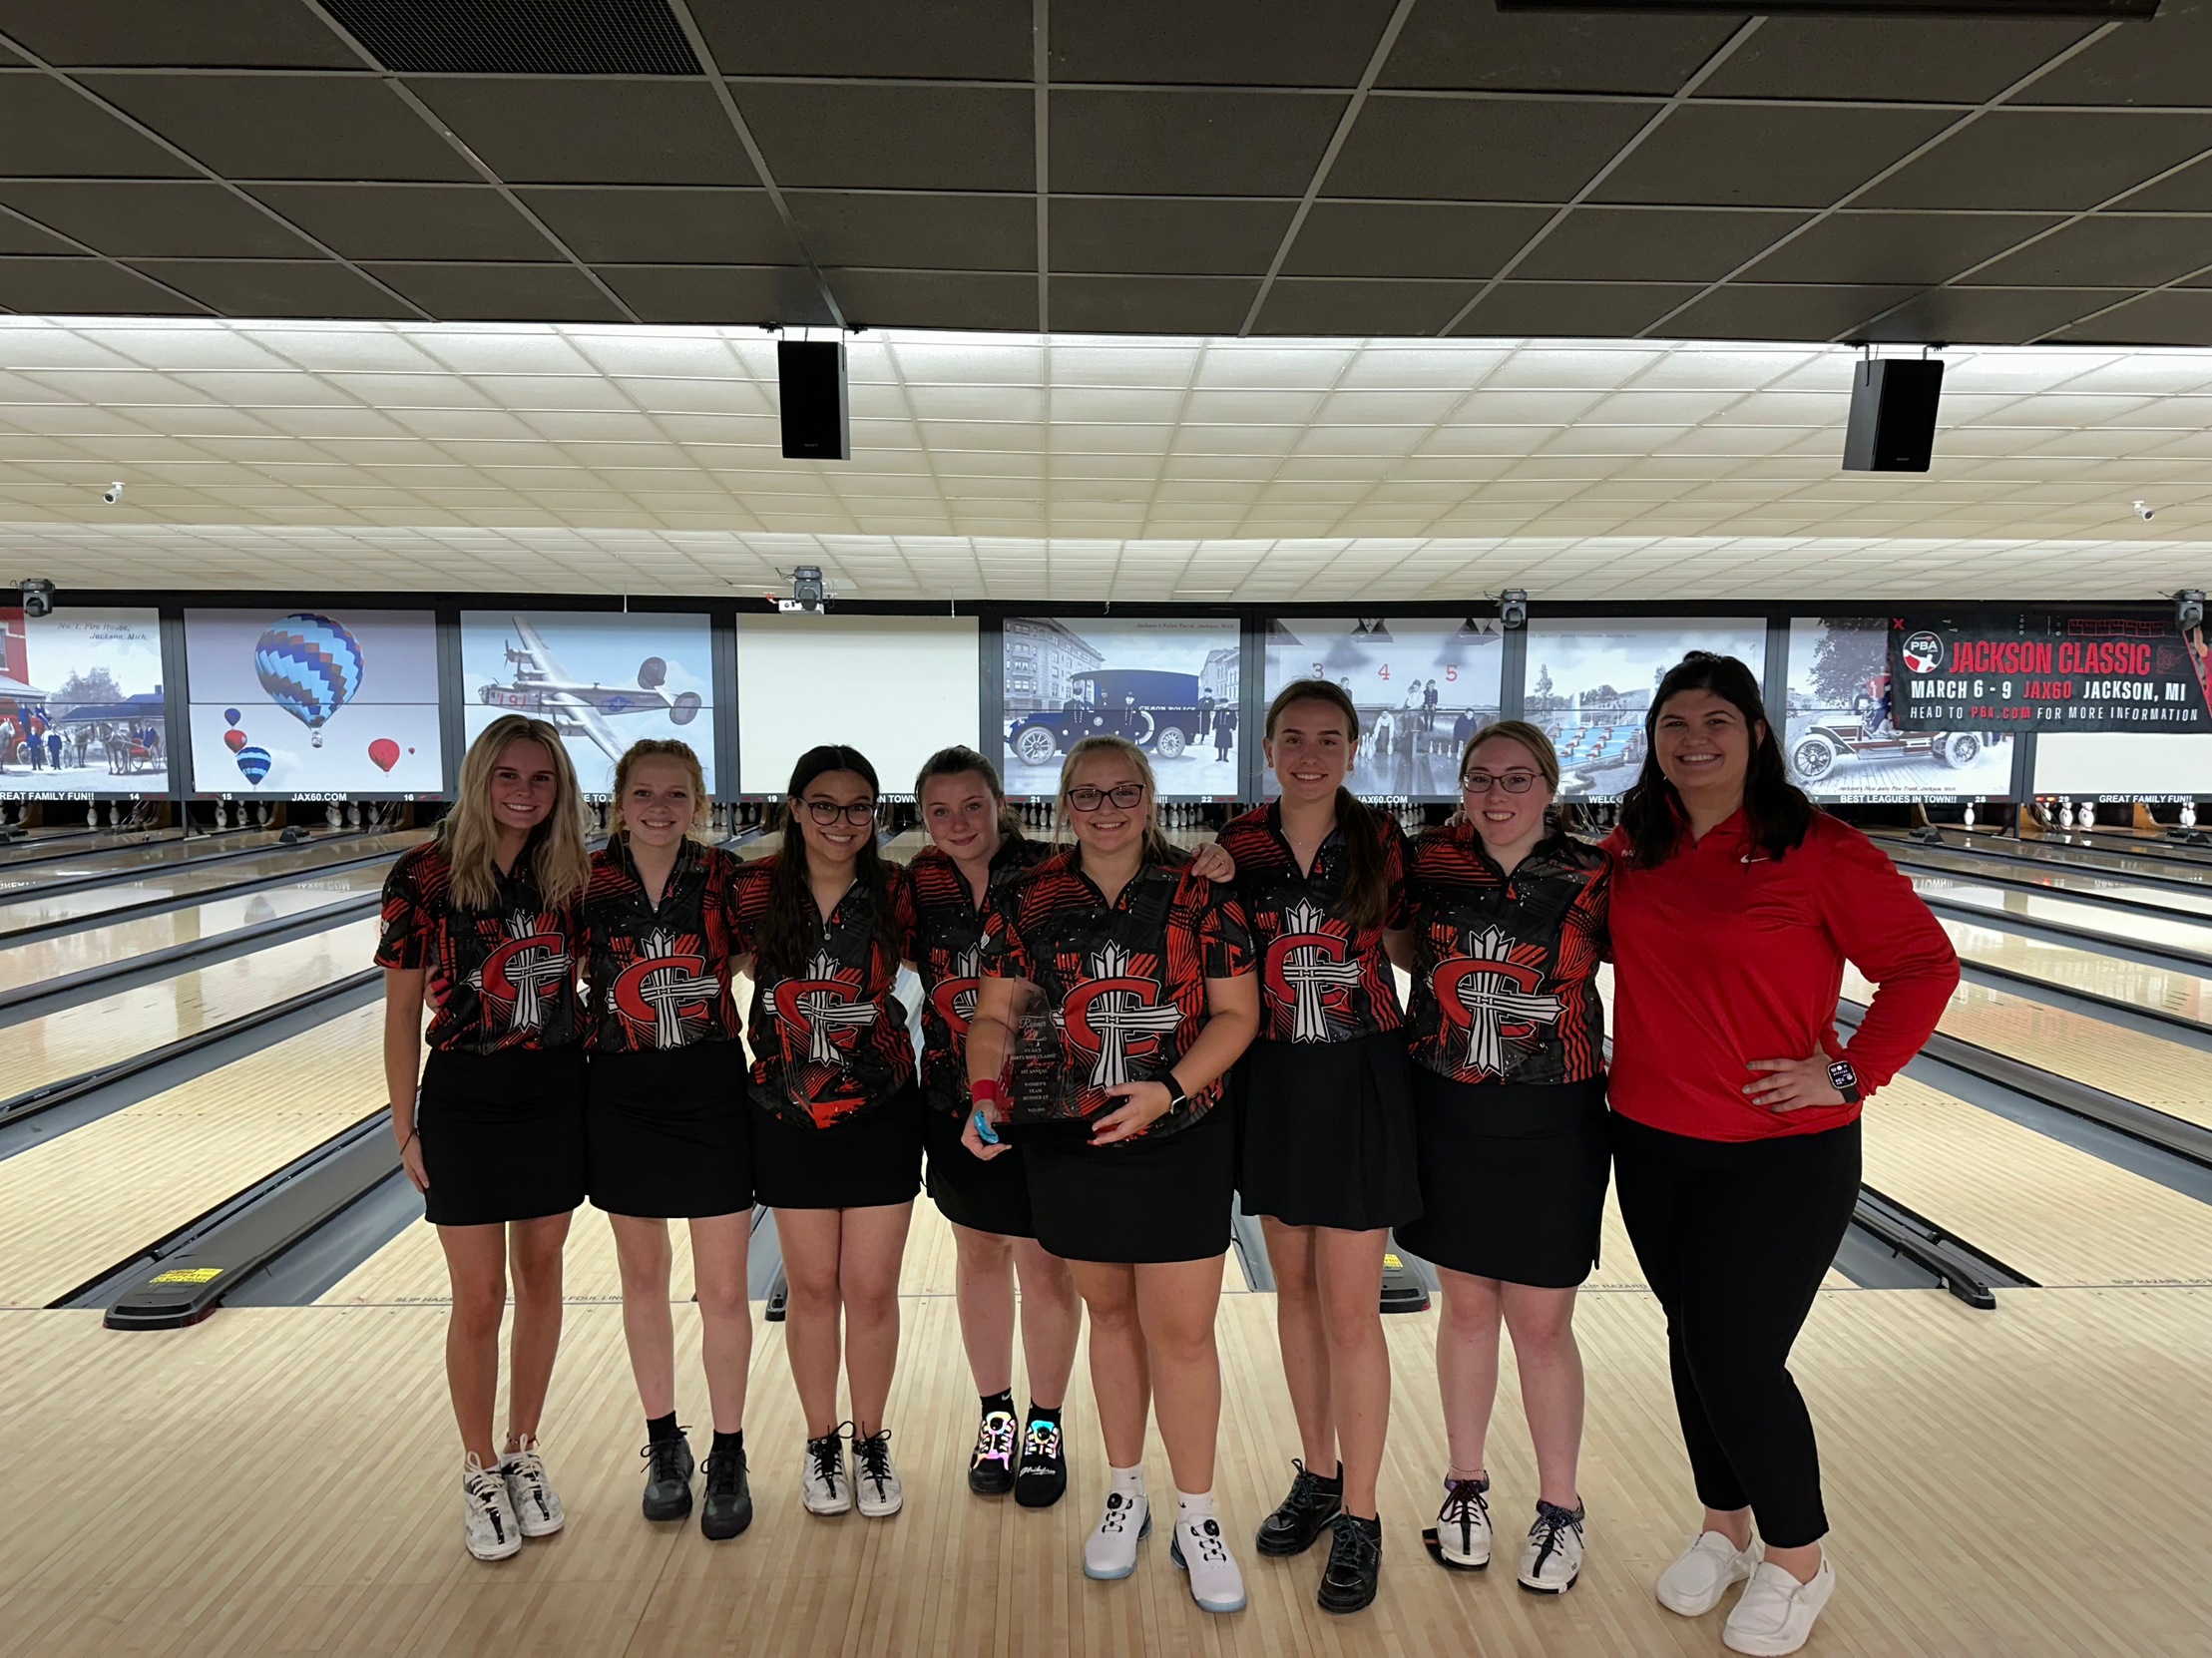 Women's Bowling opens the season placing second at the Dirty Bird Classic